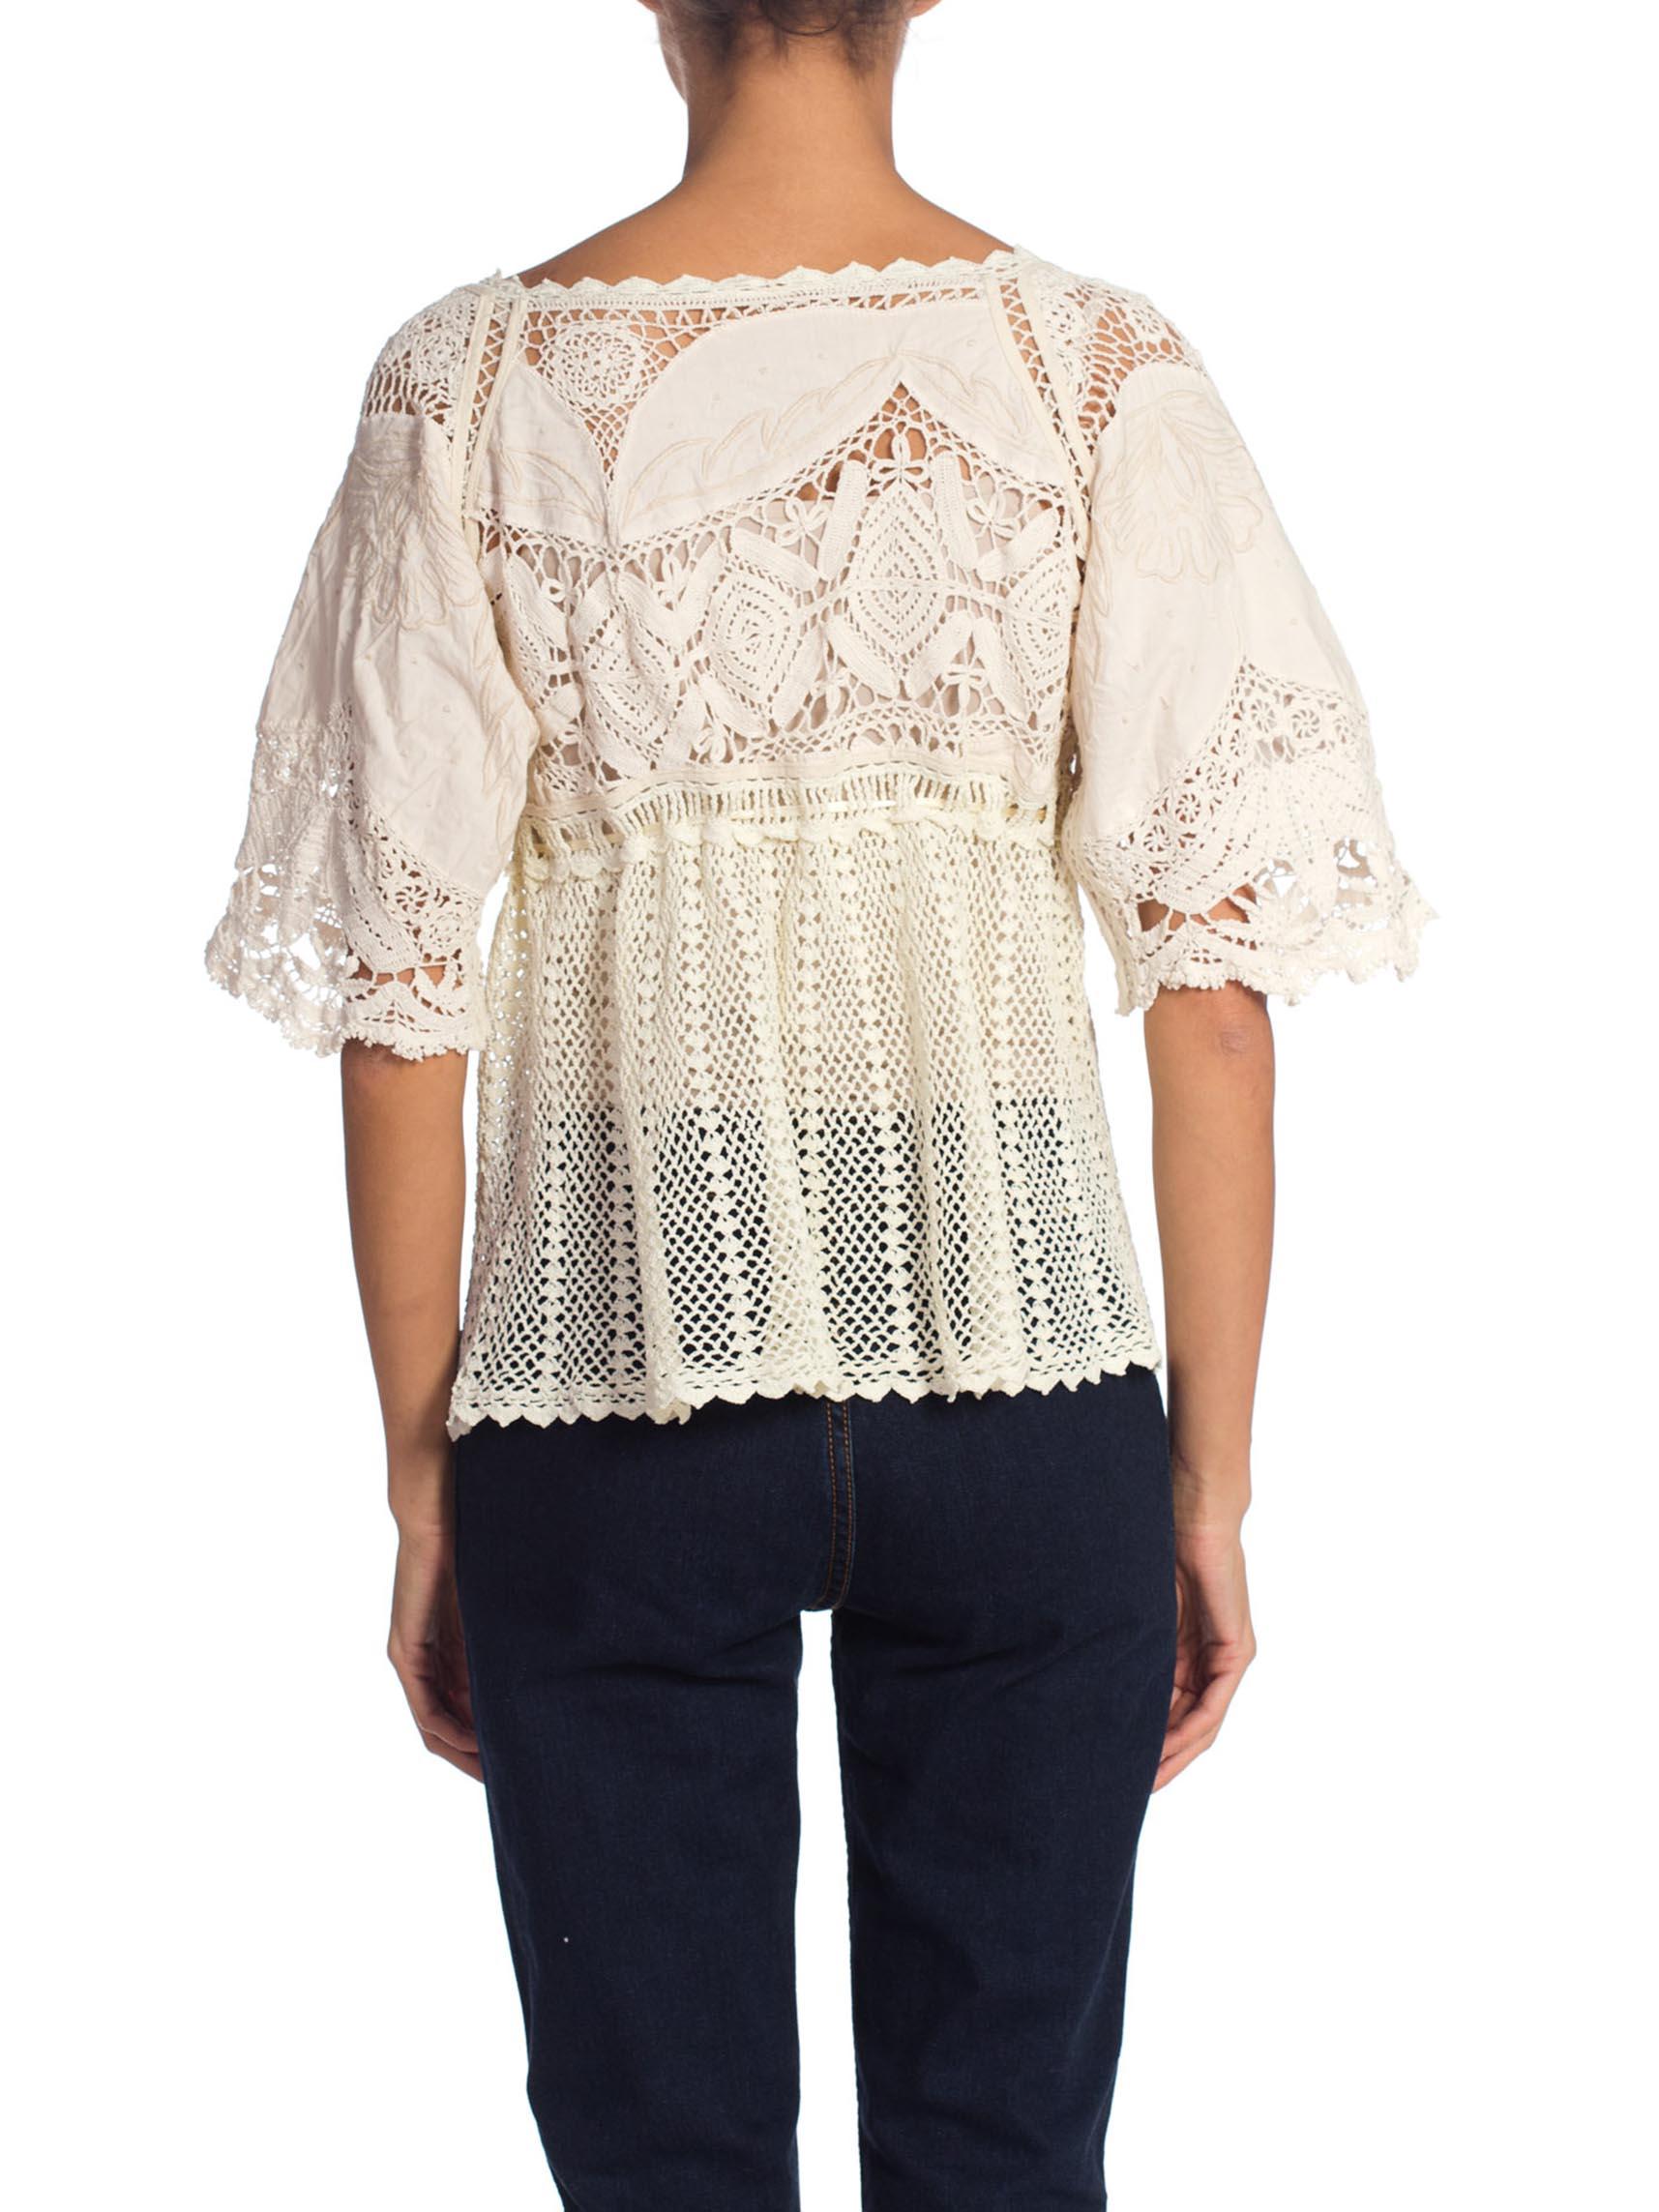 Women's 1970S Cream Cotton Crochet Edwardian Style Embroidered Top